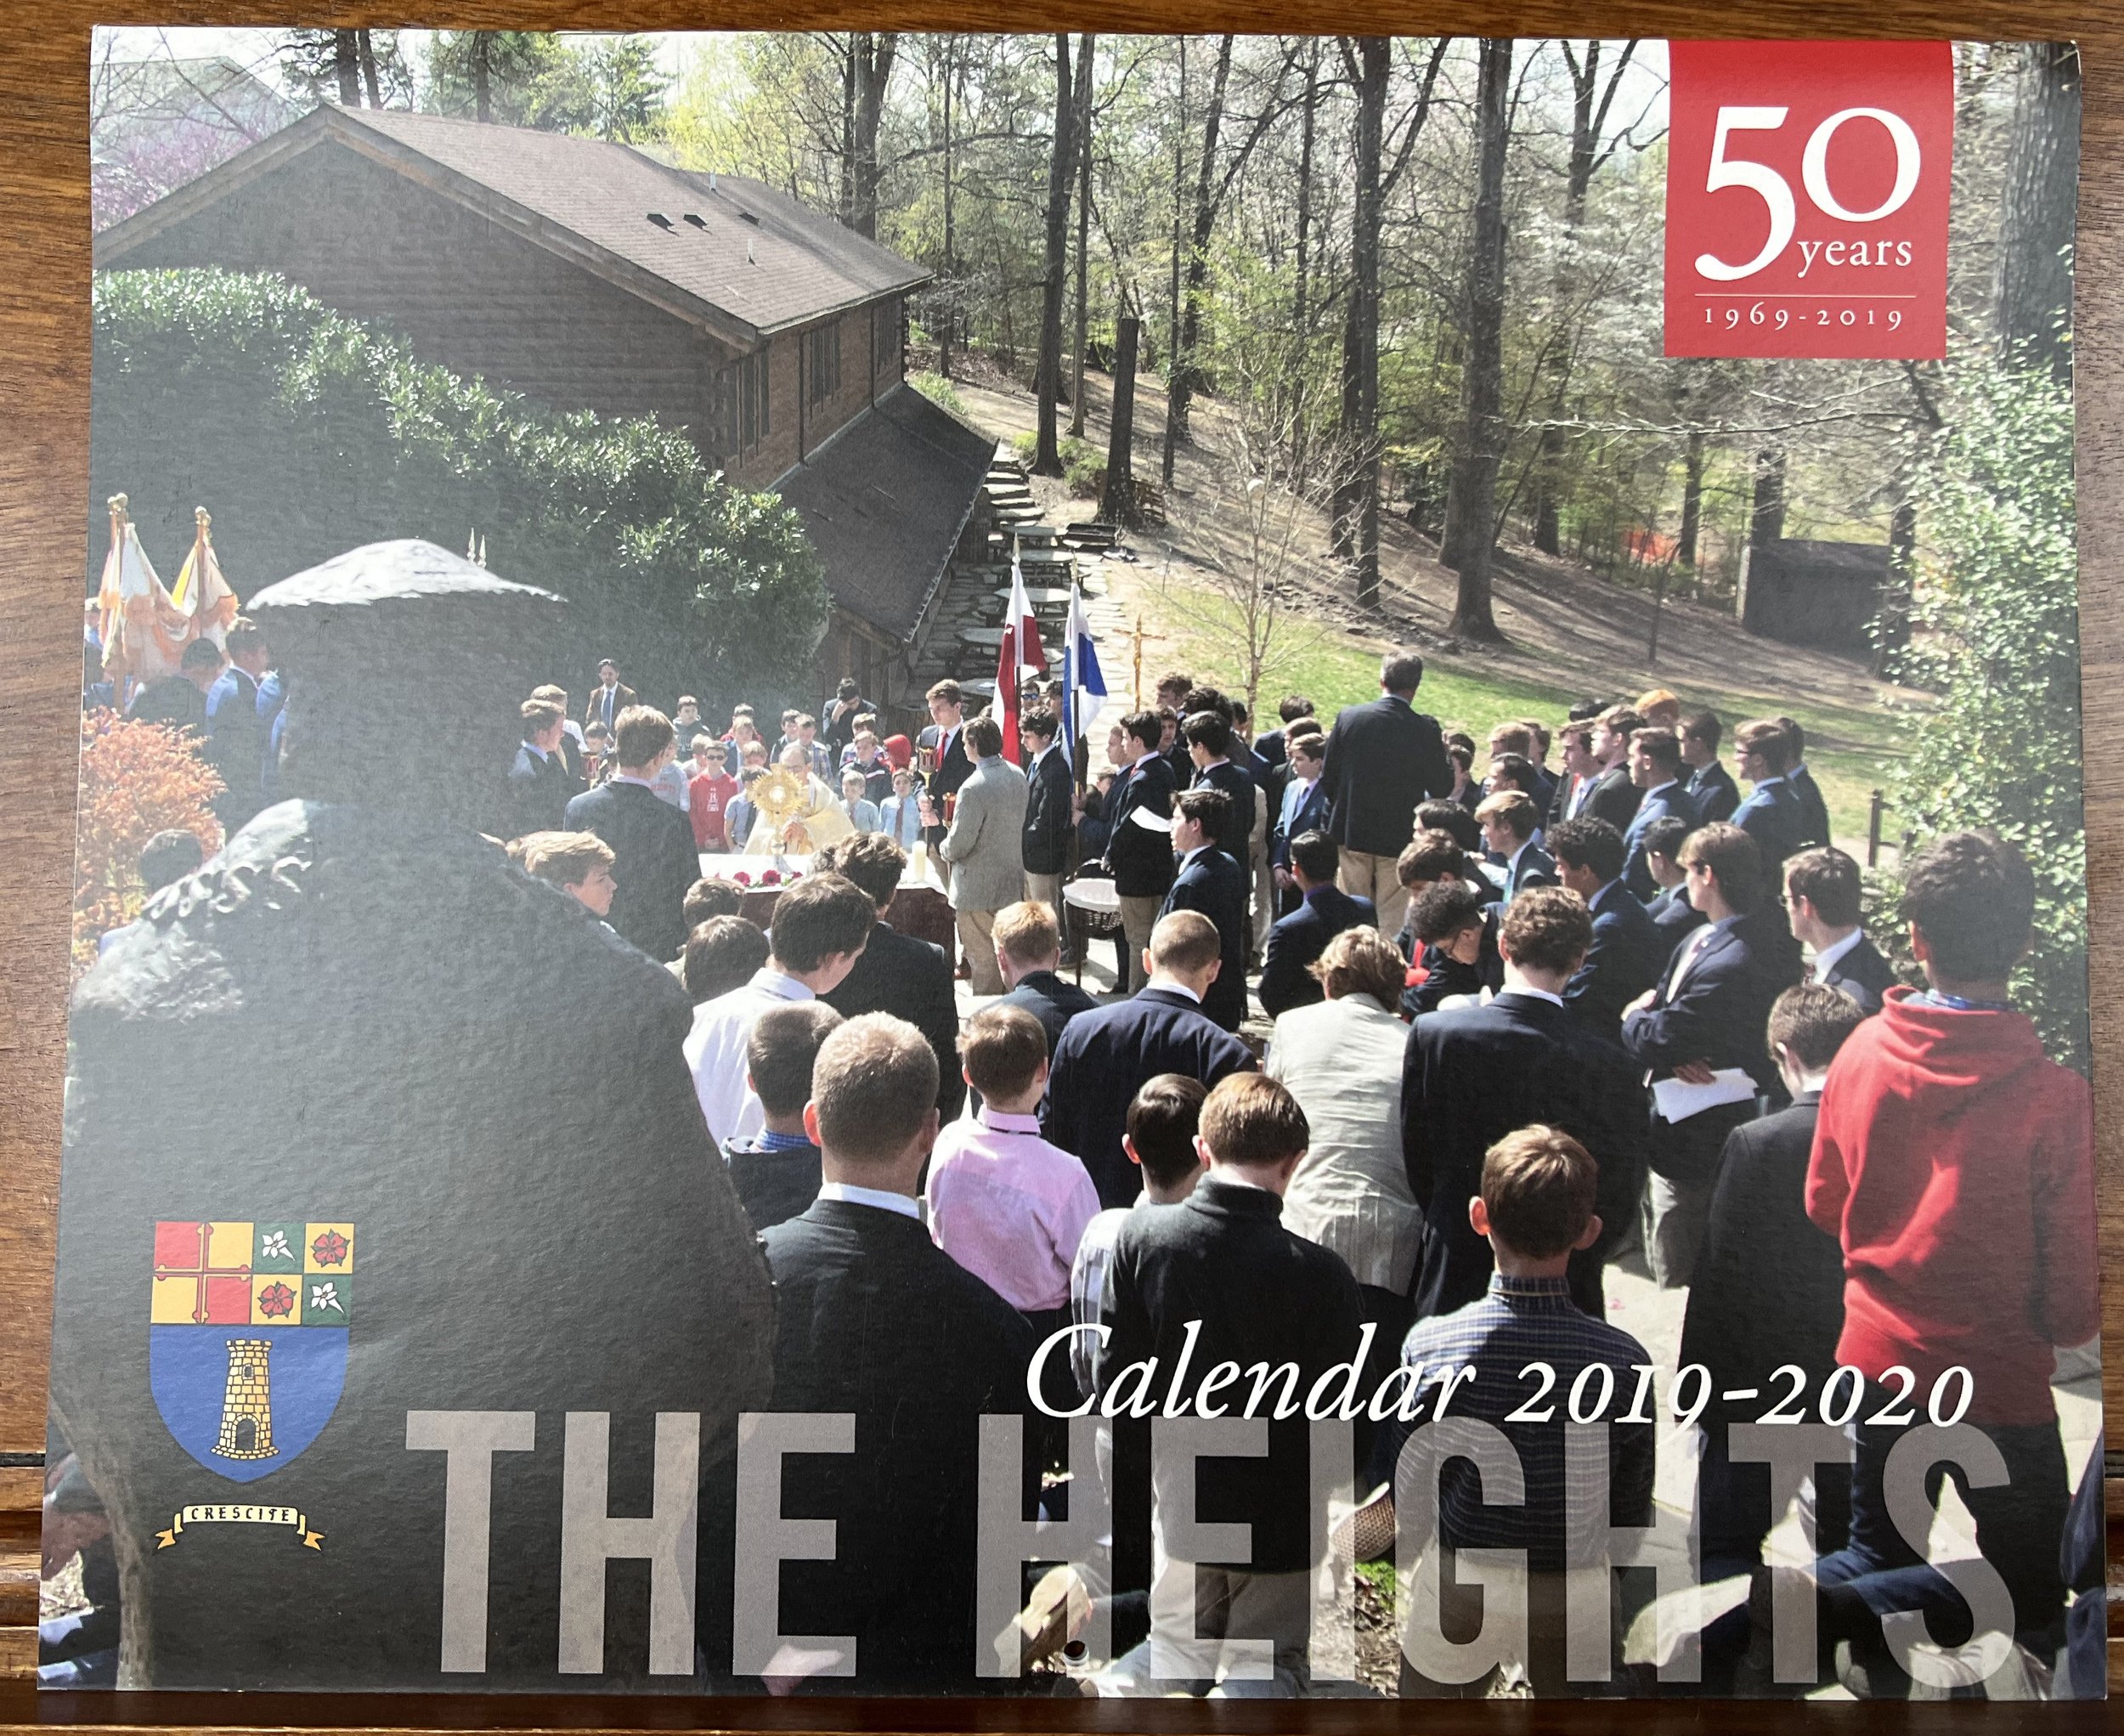 The Heights School calendar for their 50 year anniversary